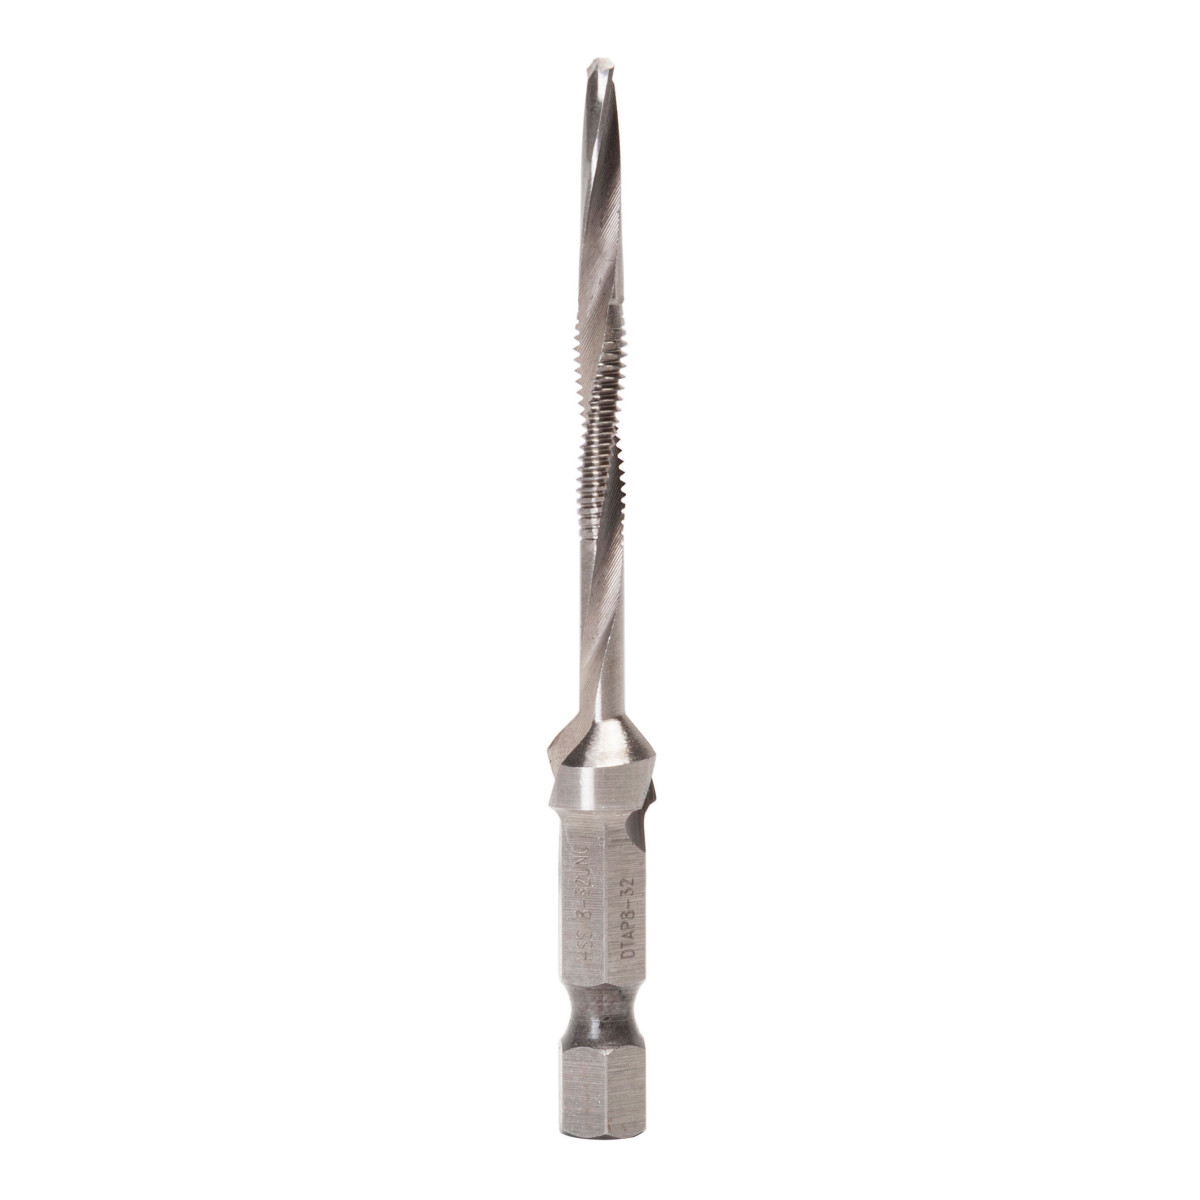 8-32NF Combination Drill Tap Bits.  Drill, Tap, and Countersink in one easy to use bit.  Tap holes up to 4X's faster than traditional methods.  One-piece Drill/Tap design ensures proper hole size for threaded tap size.  Available kit and individual bits in 8-32NC, 10-32NF, and 1/4-20NC thread sizes.  Constructed of hardened High Speed Steel.  Long length Drill/Tap Bits tap up to 1/2